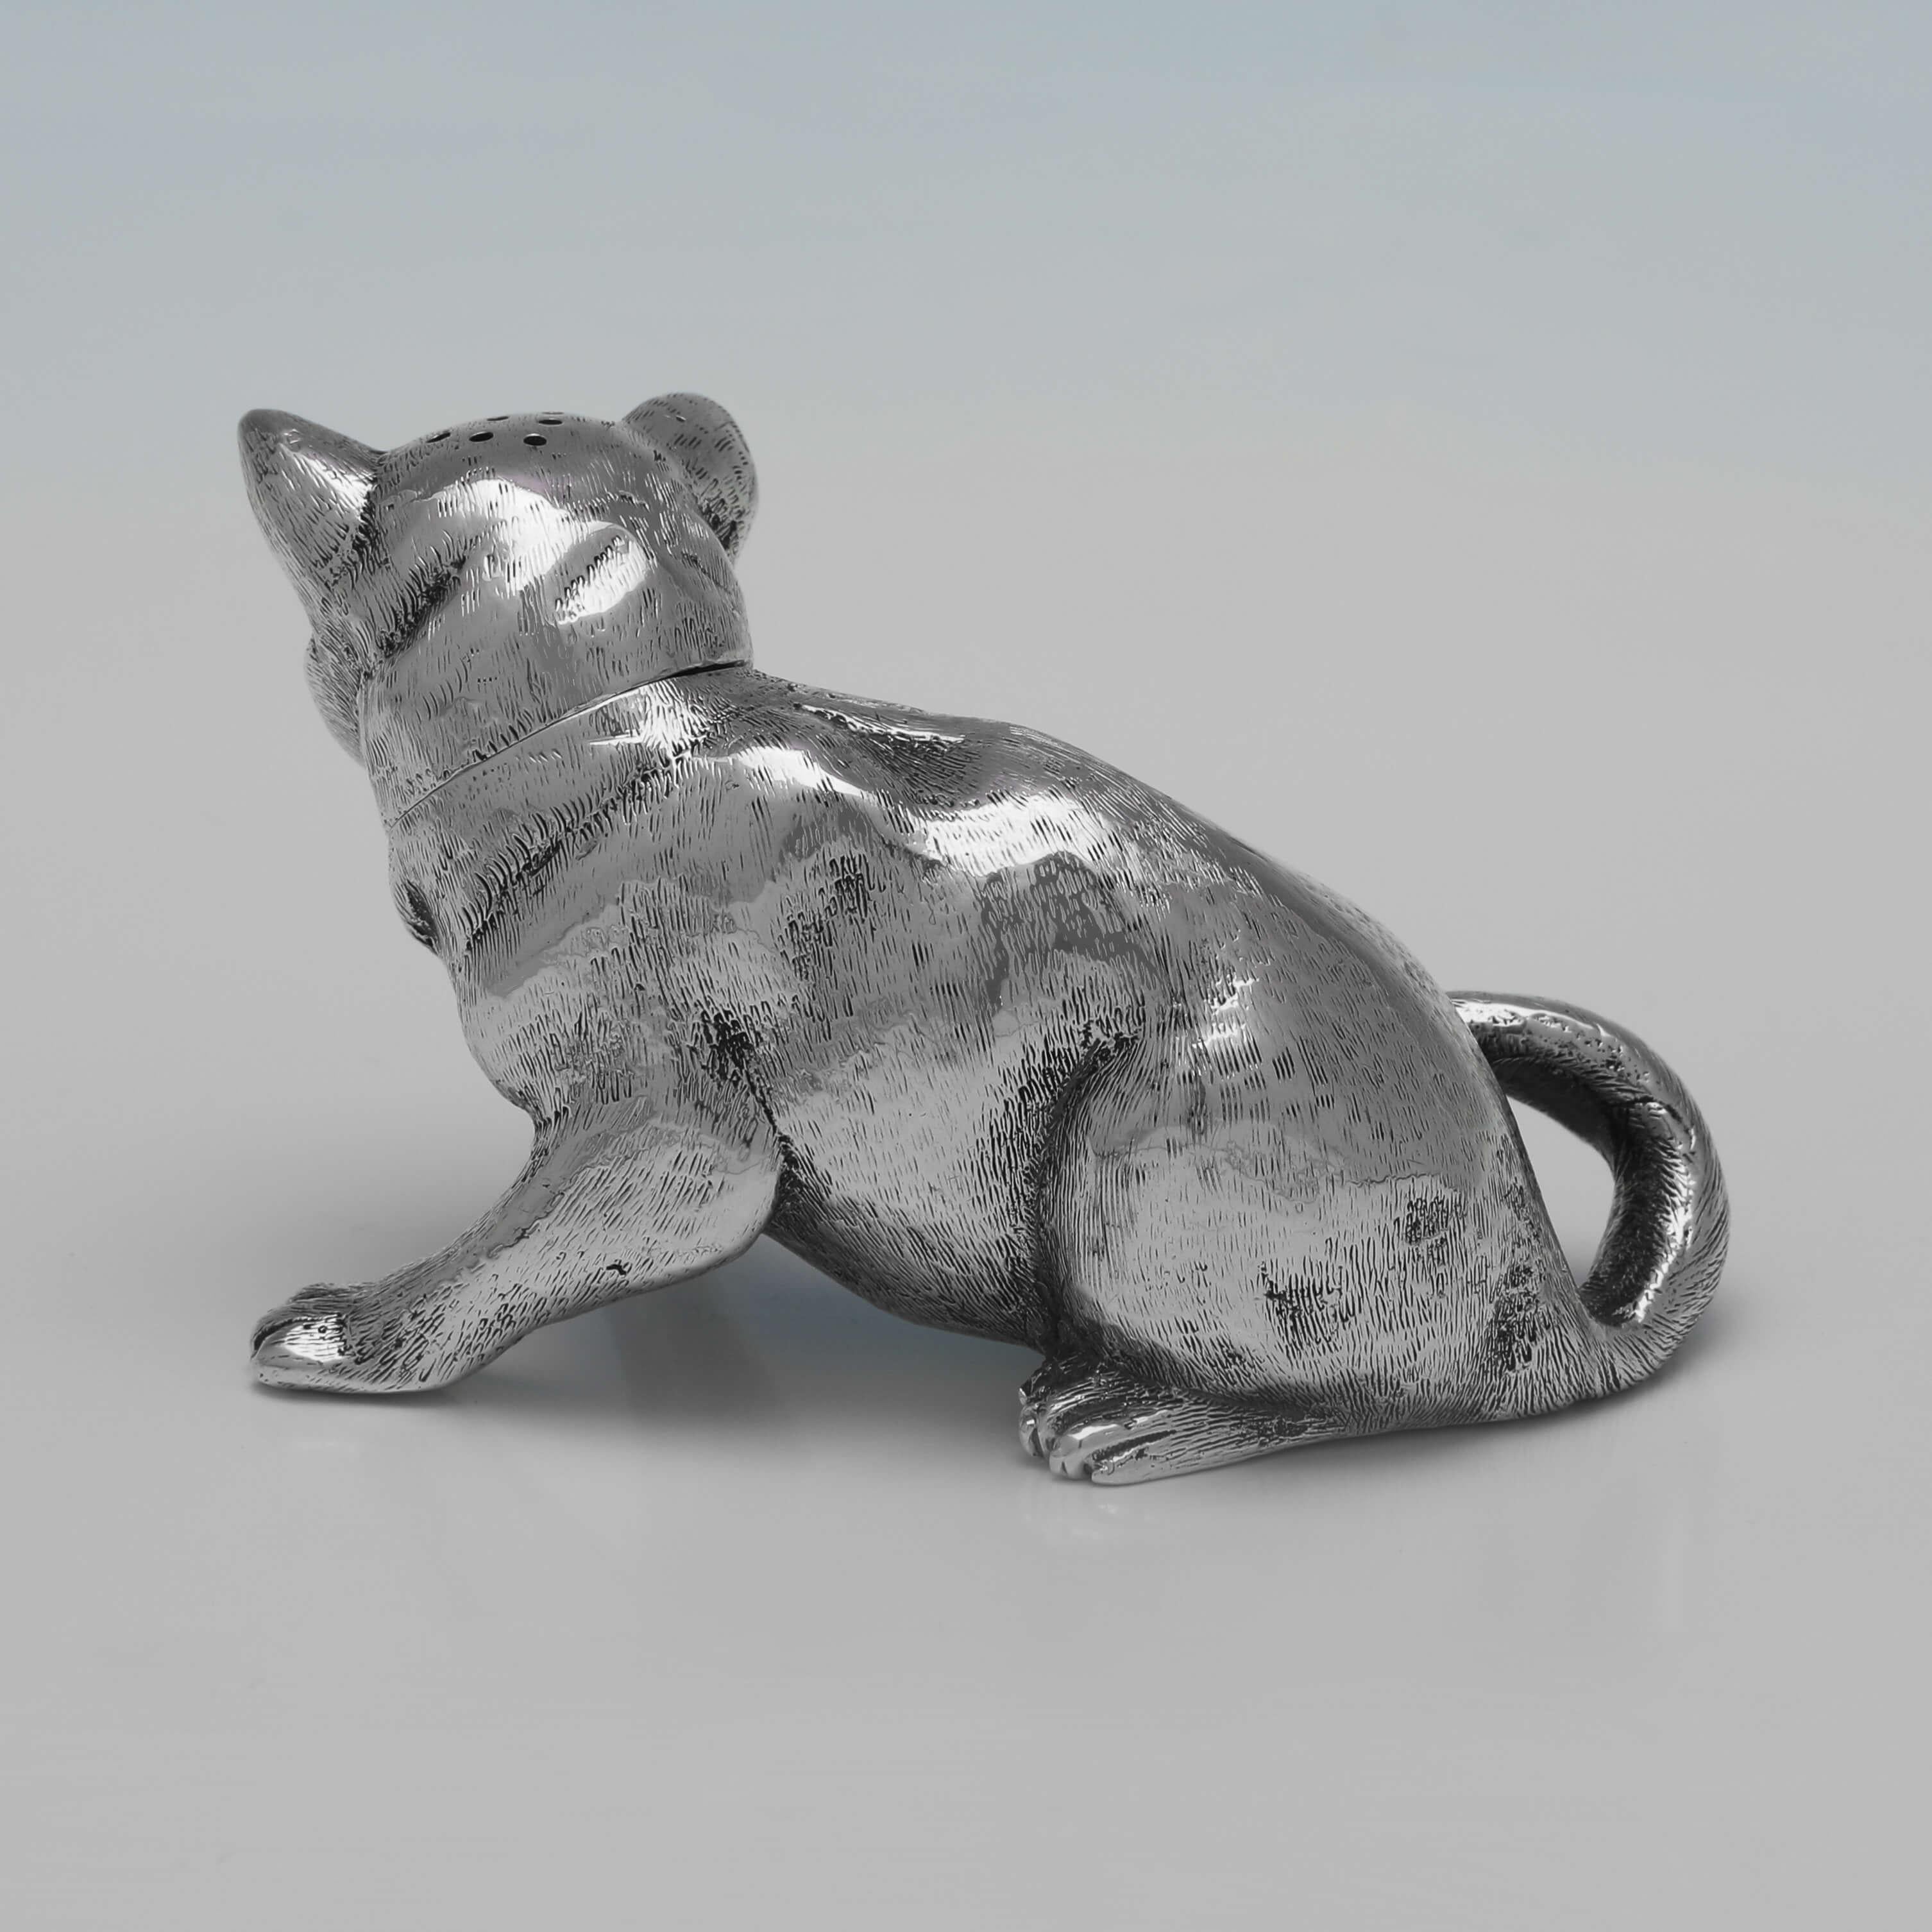 Hallmarked in London in 1880 by Jane Brownett, this very rare, Victorian, Antique Sterling Silver Cat Pepper Pot, is elegantly modelled, and realistically finished. The cat pepper pot measures 2.25